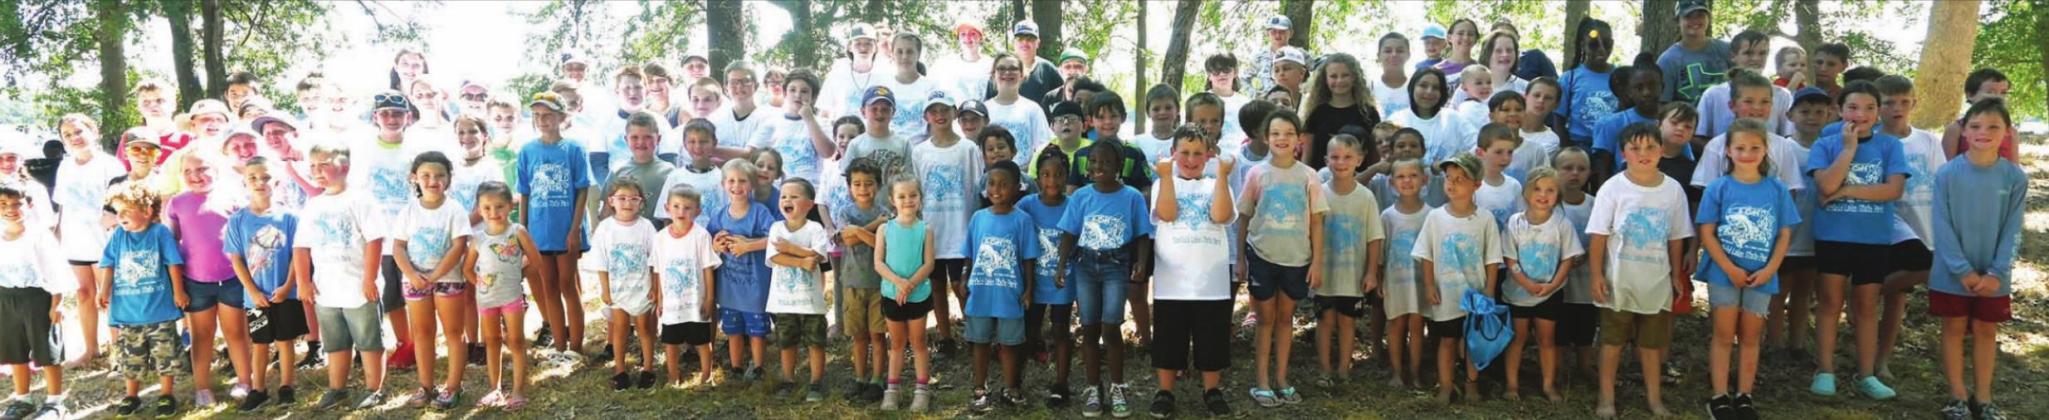 Approximately 350 kiddos came out for the 20th Annual Kid Fish Derby at Fairfield Lake State Park on Saturday morning, July 9. Pictured are the ones who gathered at the end of the event. All of the youngsters got lunch, a kid fish derby official t-shirt, bait, and a fishing pole. Photos by Mitchell Pate/The Fairfield Recorder